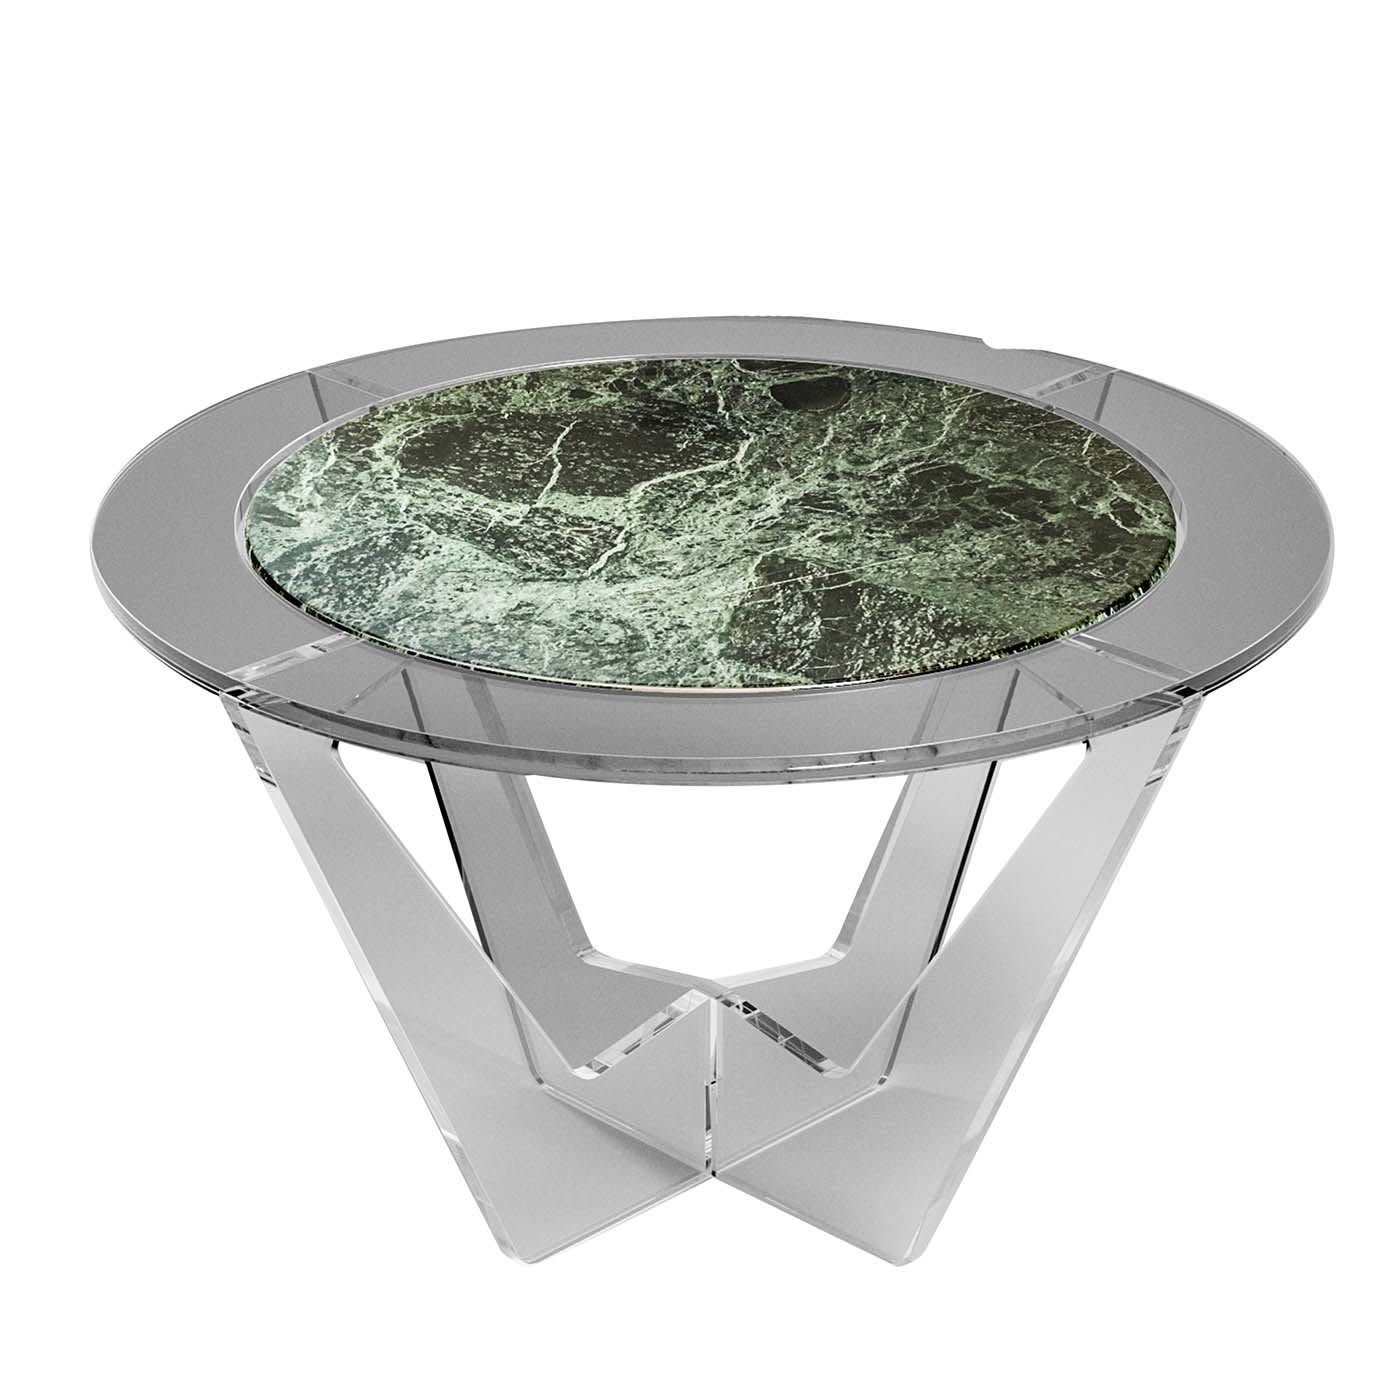 Hac Gray Round Coffee Table with Green Alps Marble Top - Madea Milano